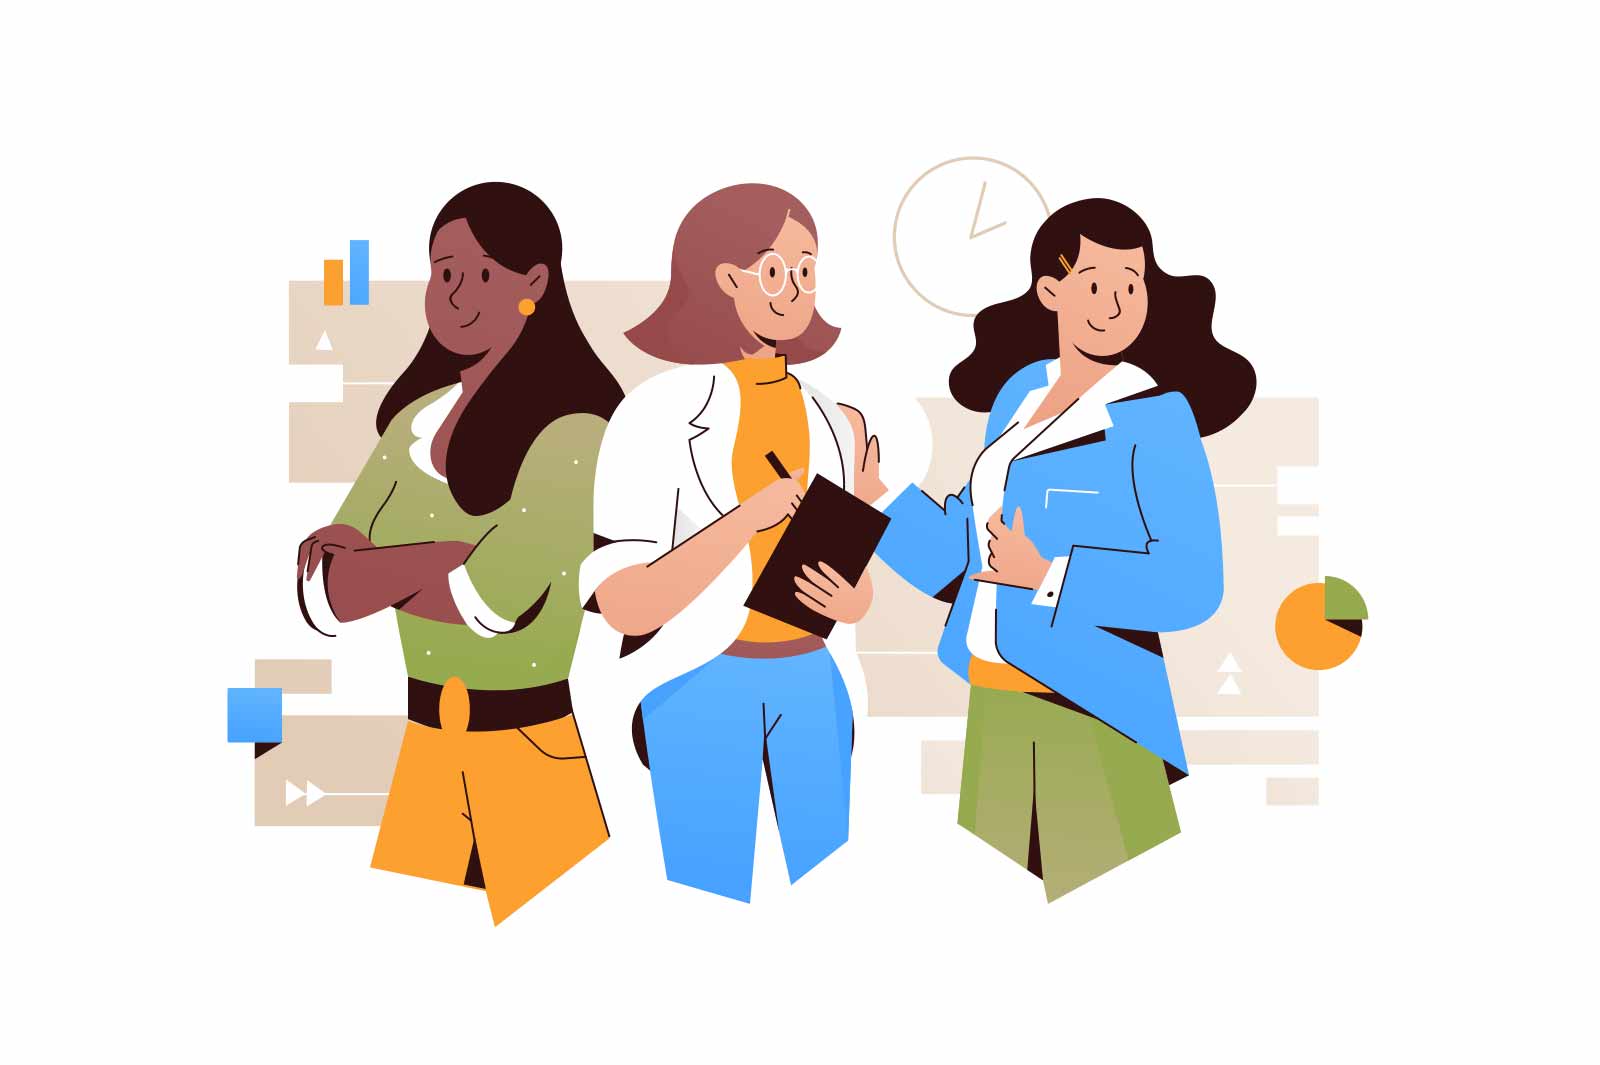 Team of friends, women friends or coworkers vector illustration. Girls standing, giving five and posing together. Teamwork and friendship